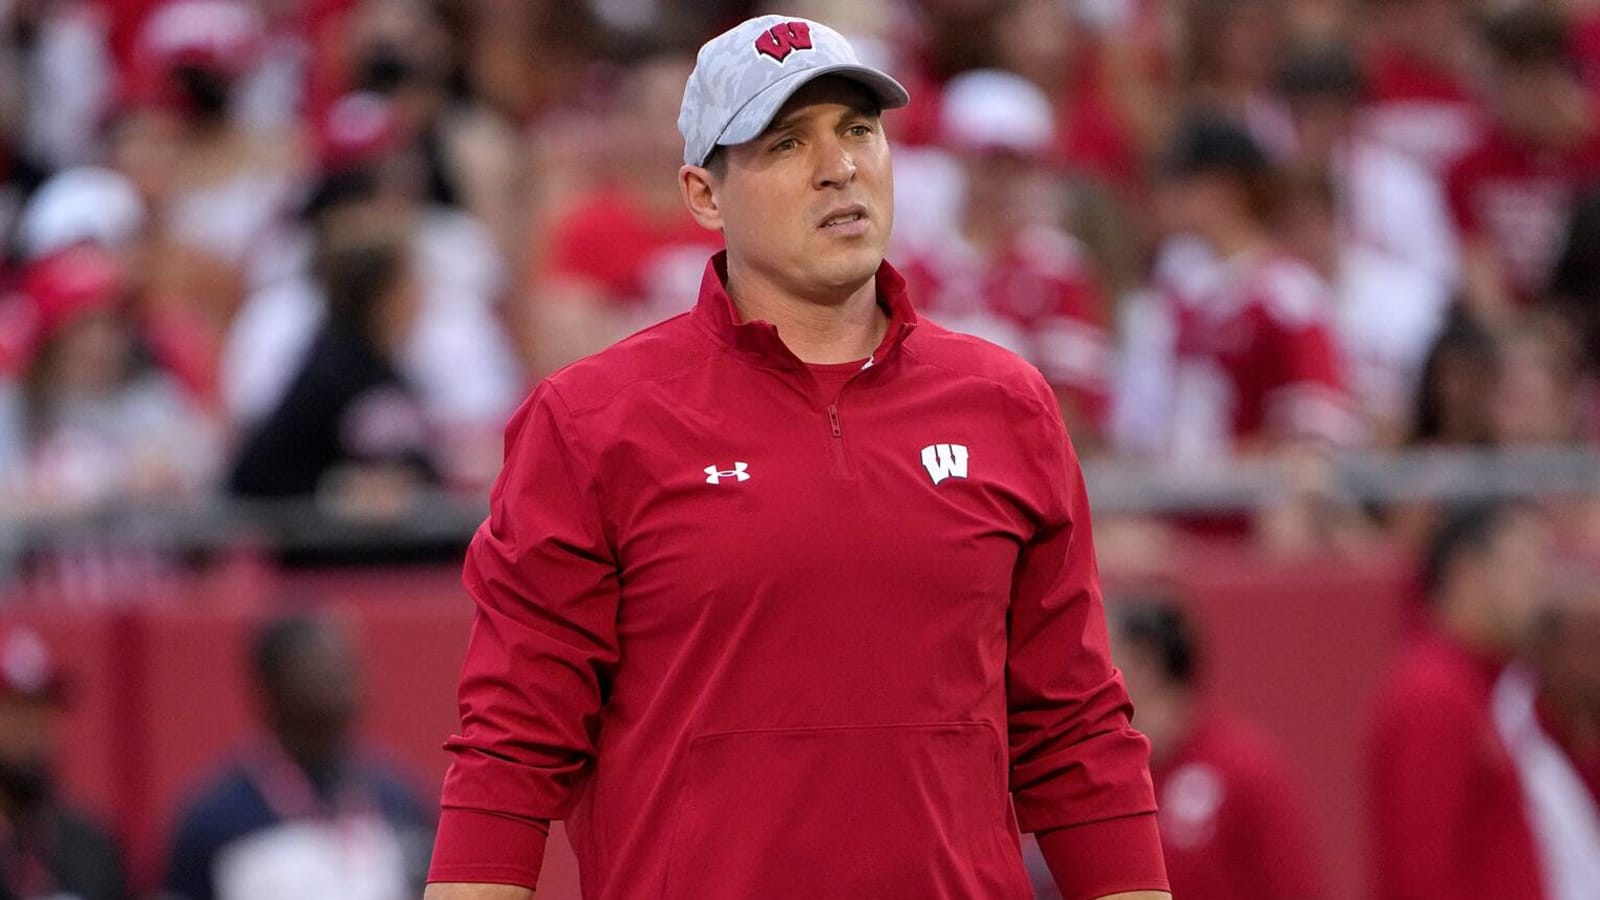 Wisconsin's Leonhard reacts to being named interim HC